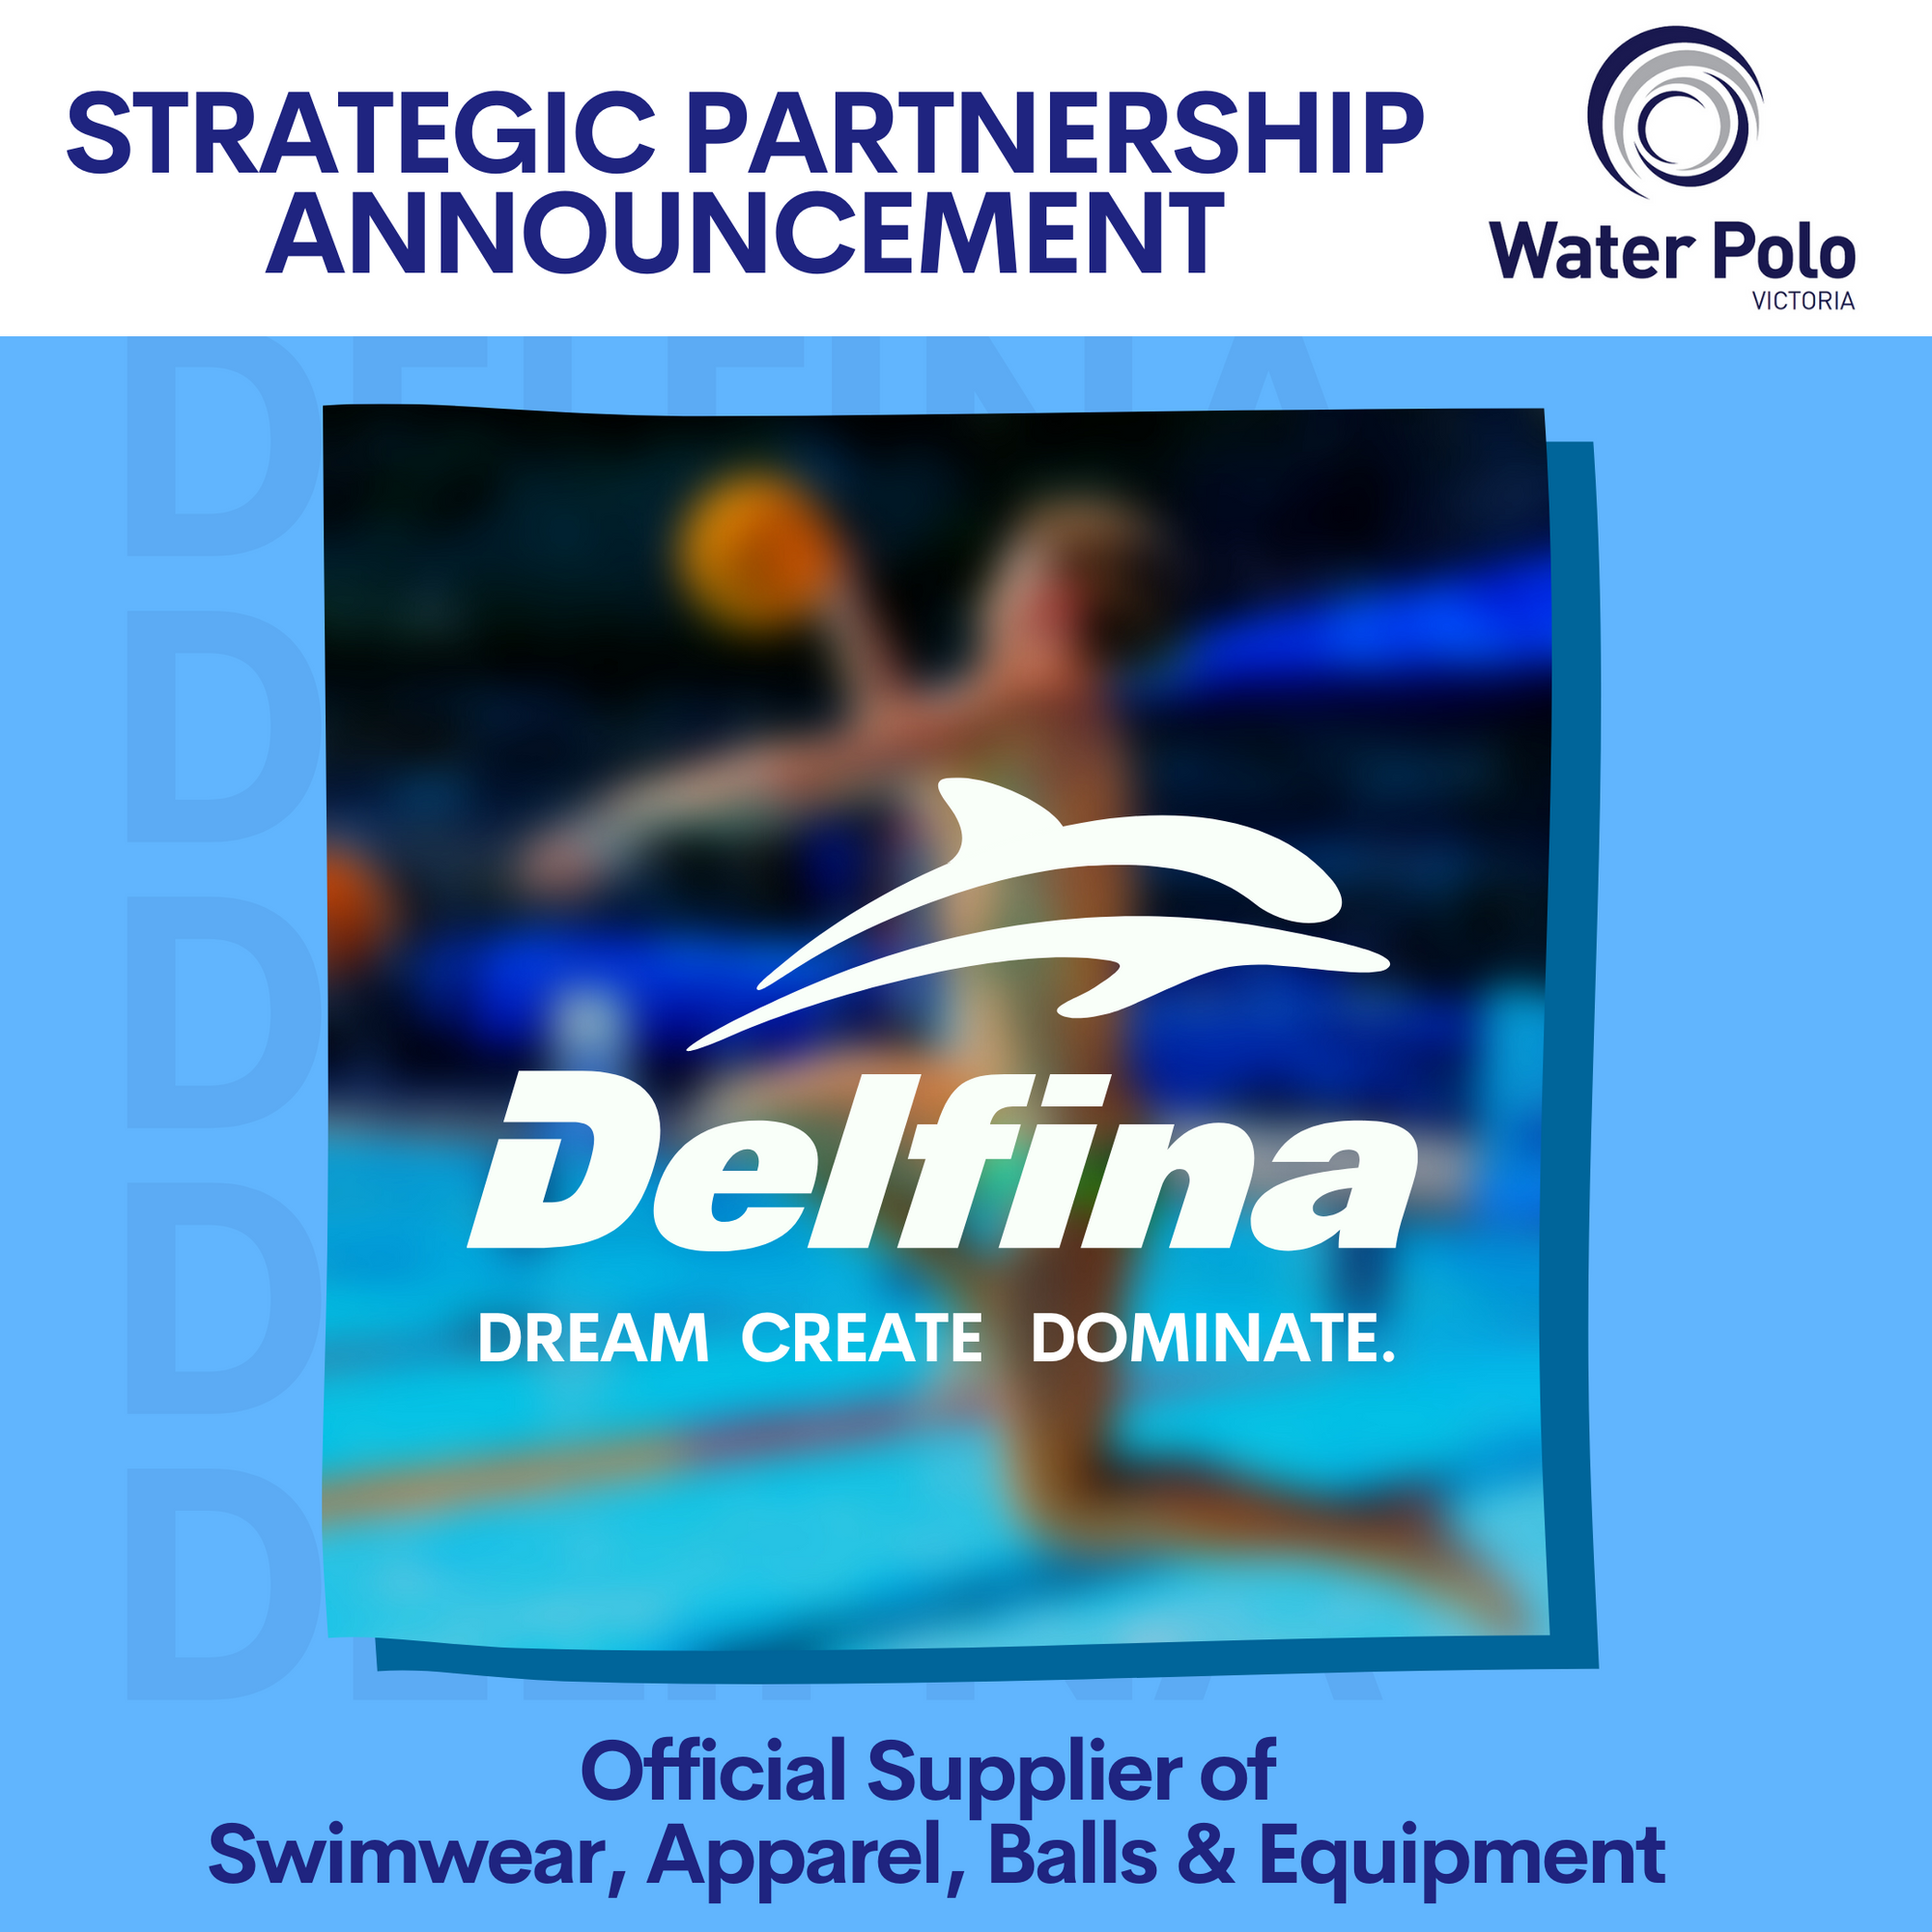 Strategic Partnership Announced with Water Polo Victoria